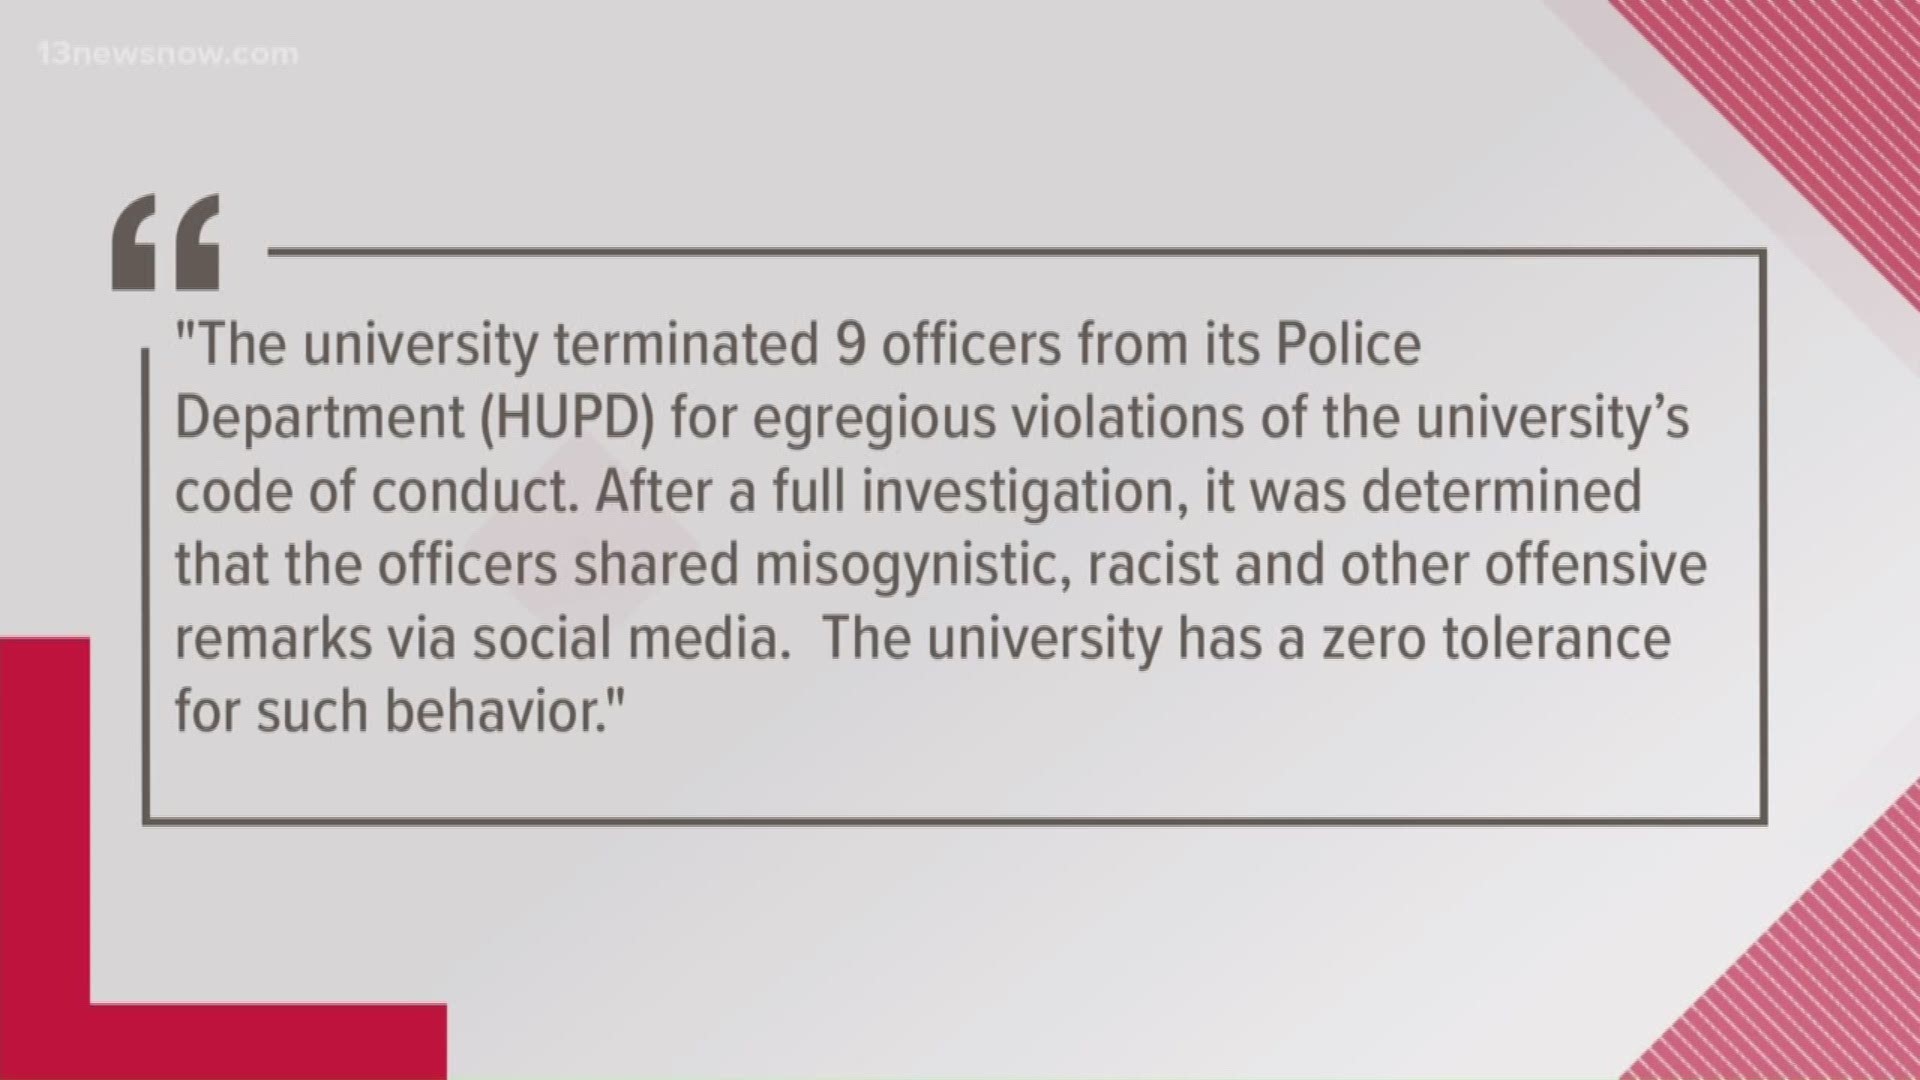 Nine officers have been arrested for comments made online that violated university policy. After an investigation, it was discovered the officers shared misogynistic, racist and other offensive remarks on social media.